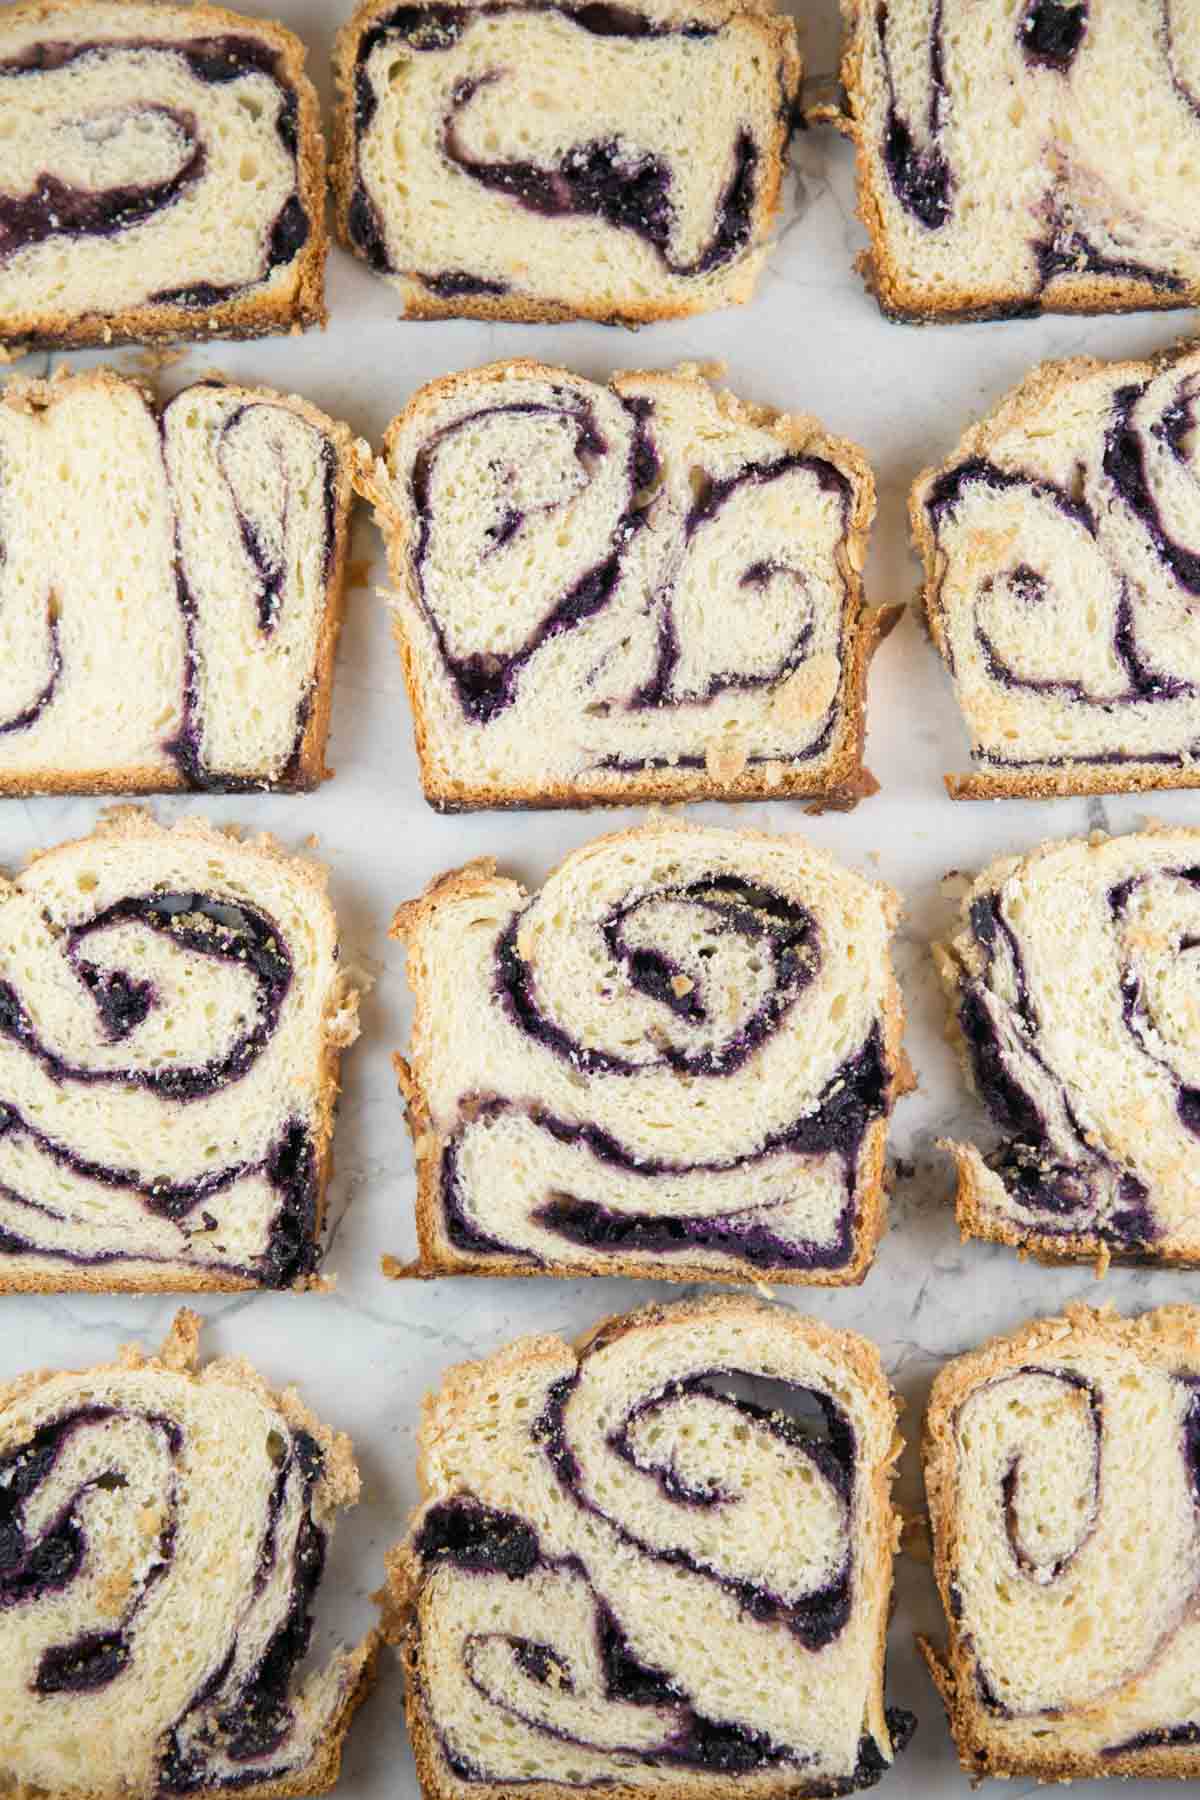 overhead view of slices of blueberry babka showing the purple fruit swirl running through each slice